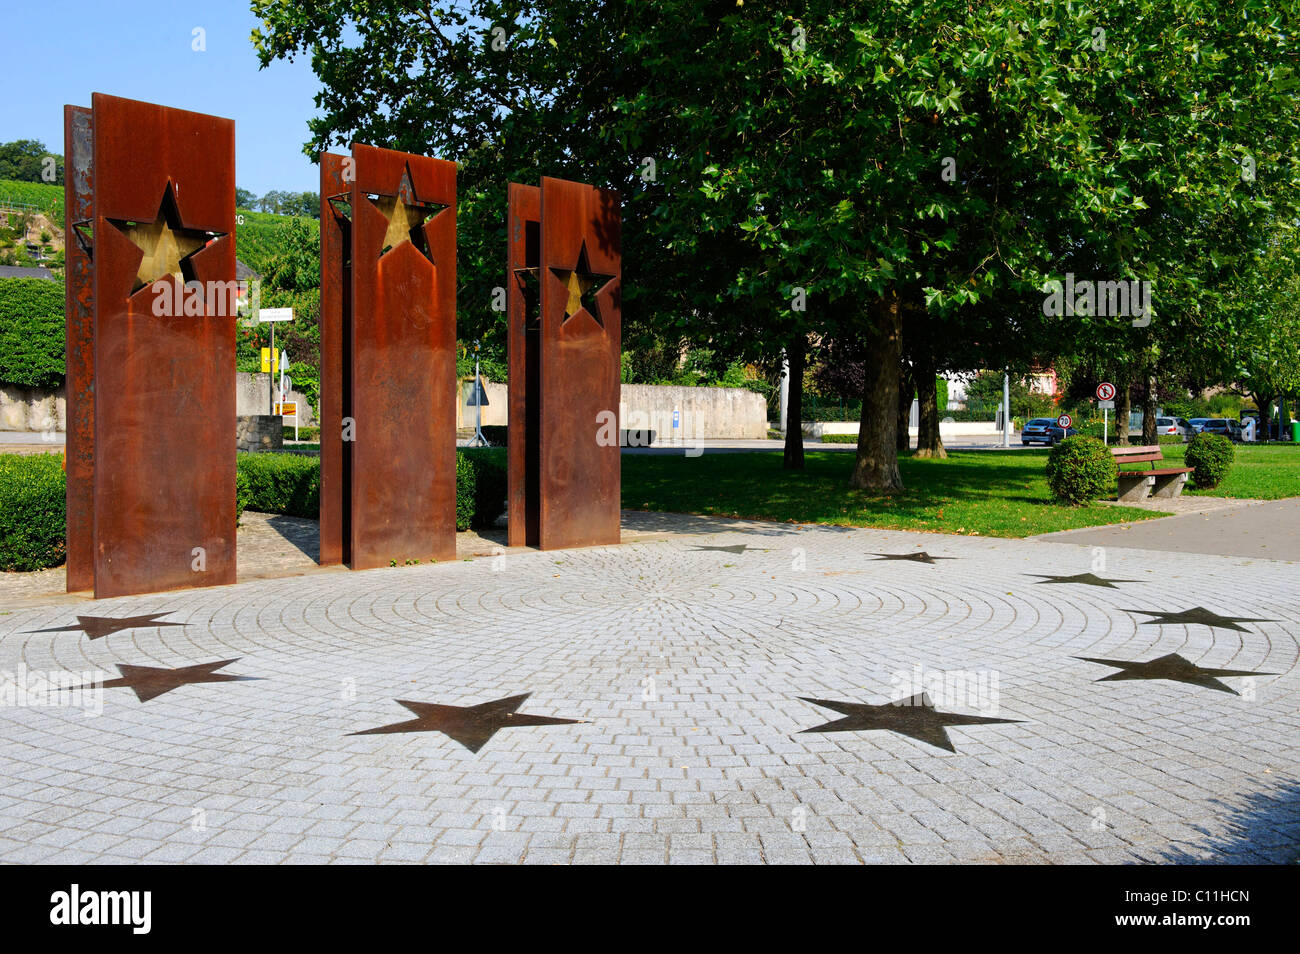 Memorial, nearby the Schengen Agreement was signed on the ship Princess Marie-Astrid in 1985, Schengen, Luxembourg, Europe Stock Photo